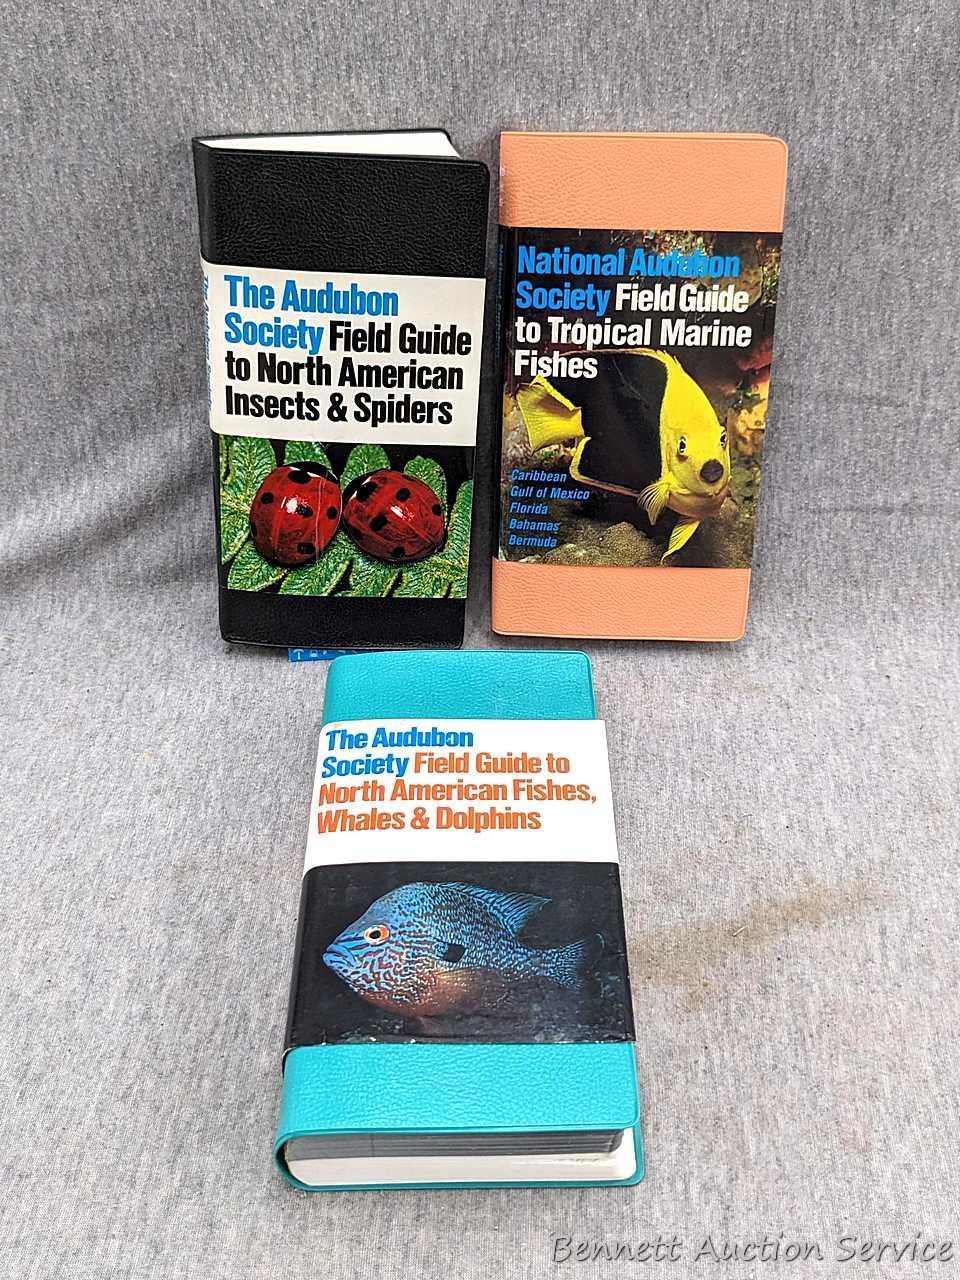 The Audubon Society Field Guide to Tropical Marine Fishes. 